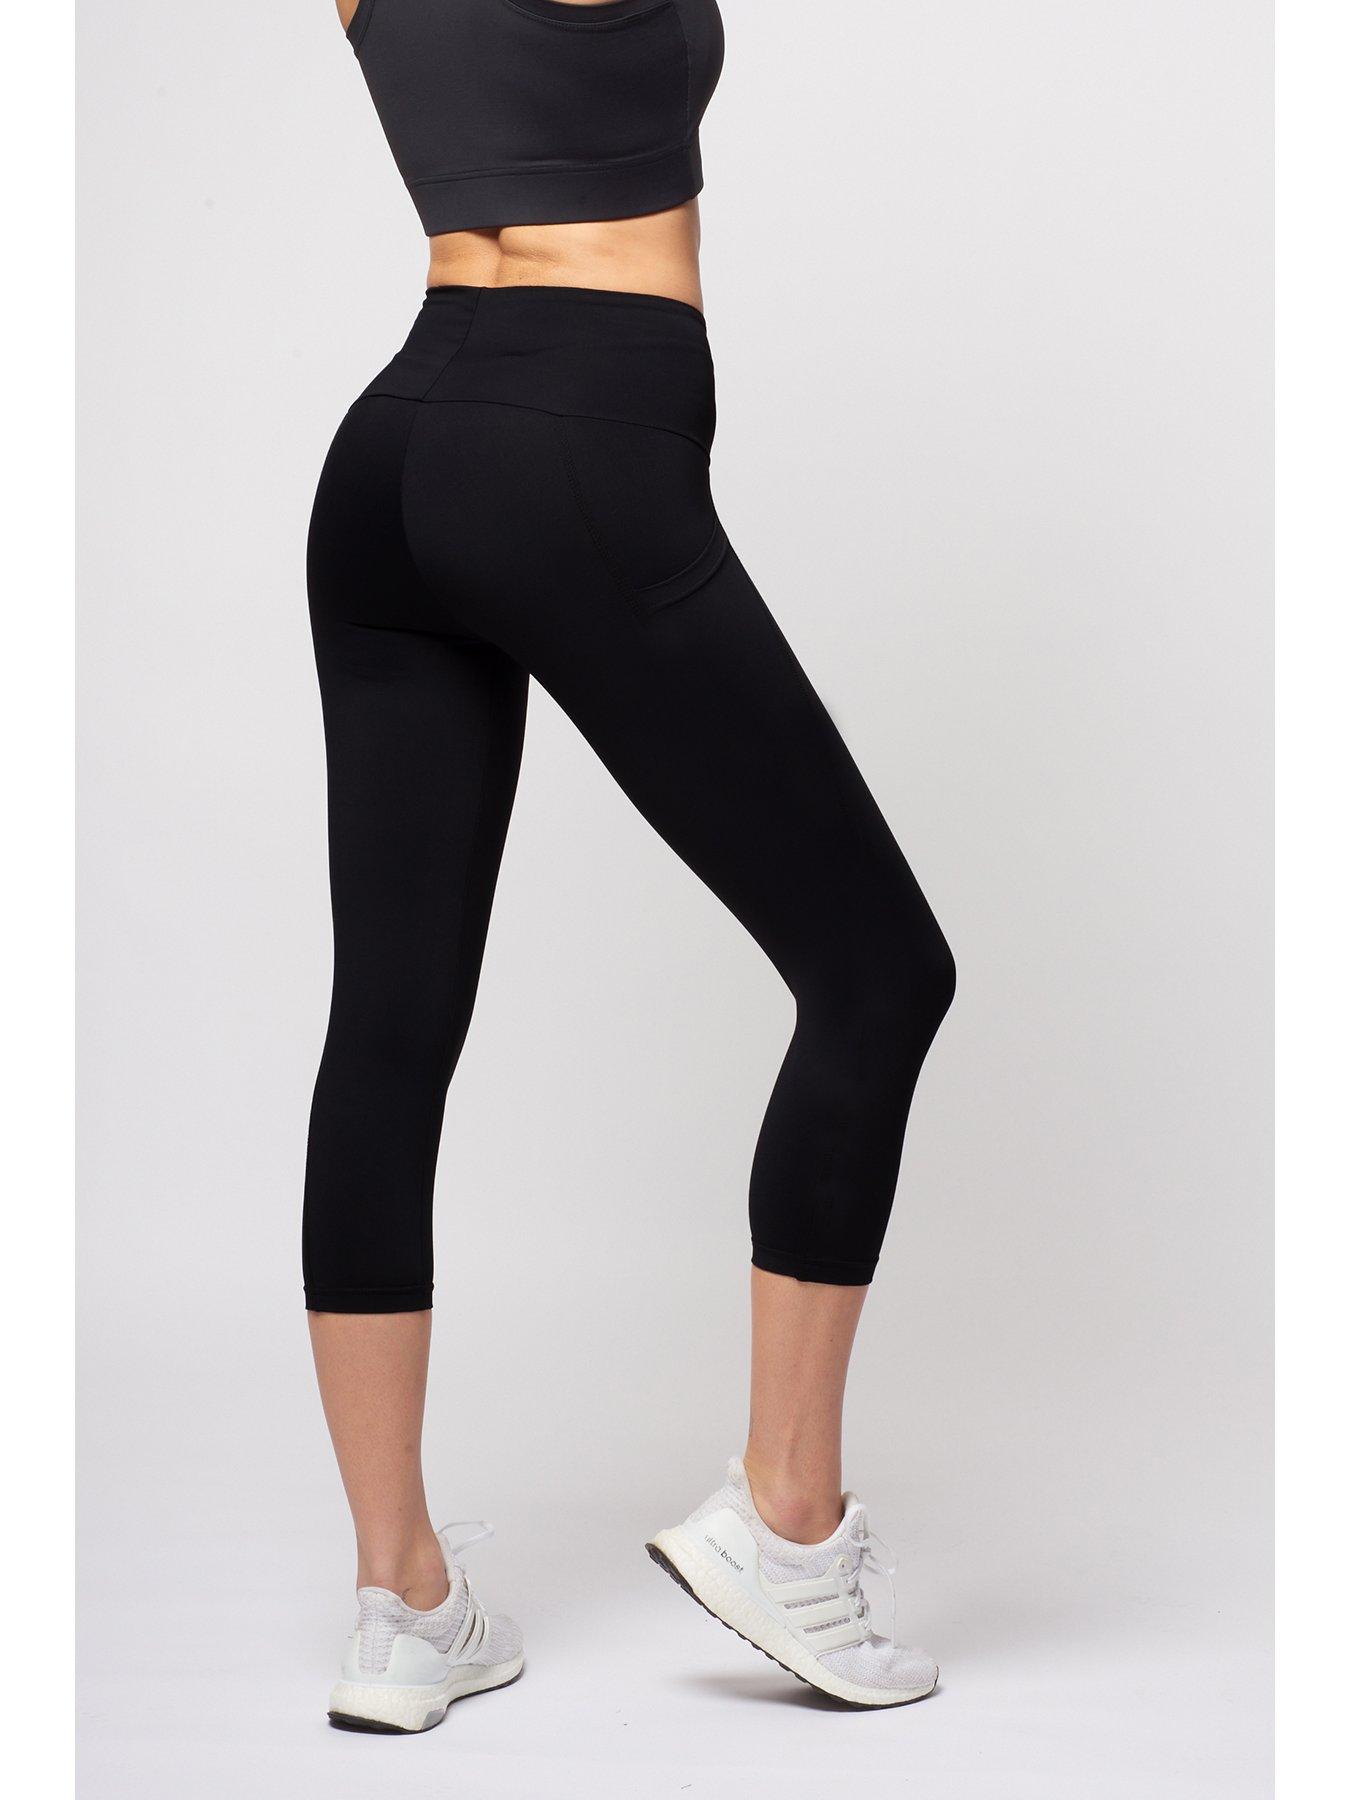 The Ultimate Cropped Legging